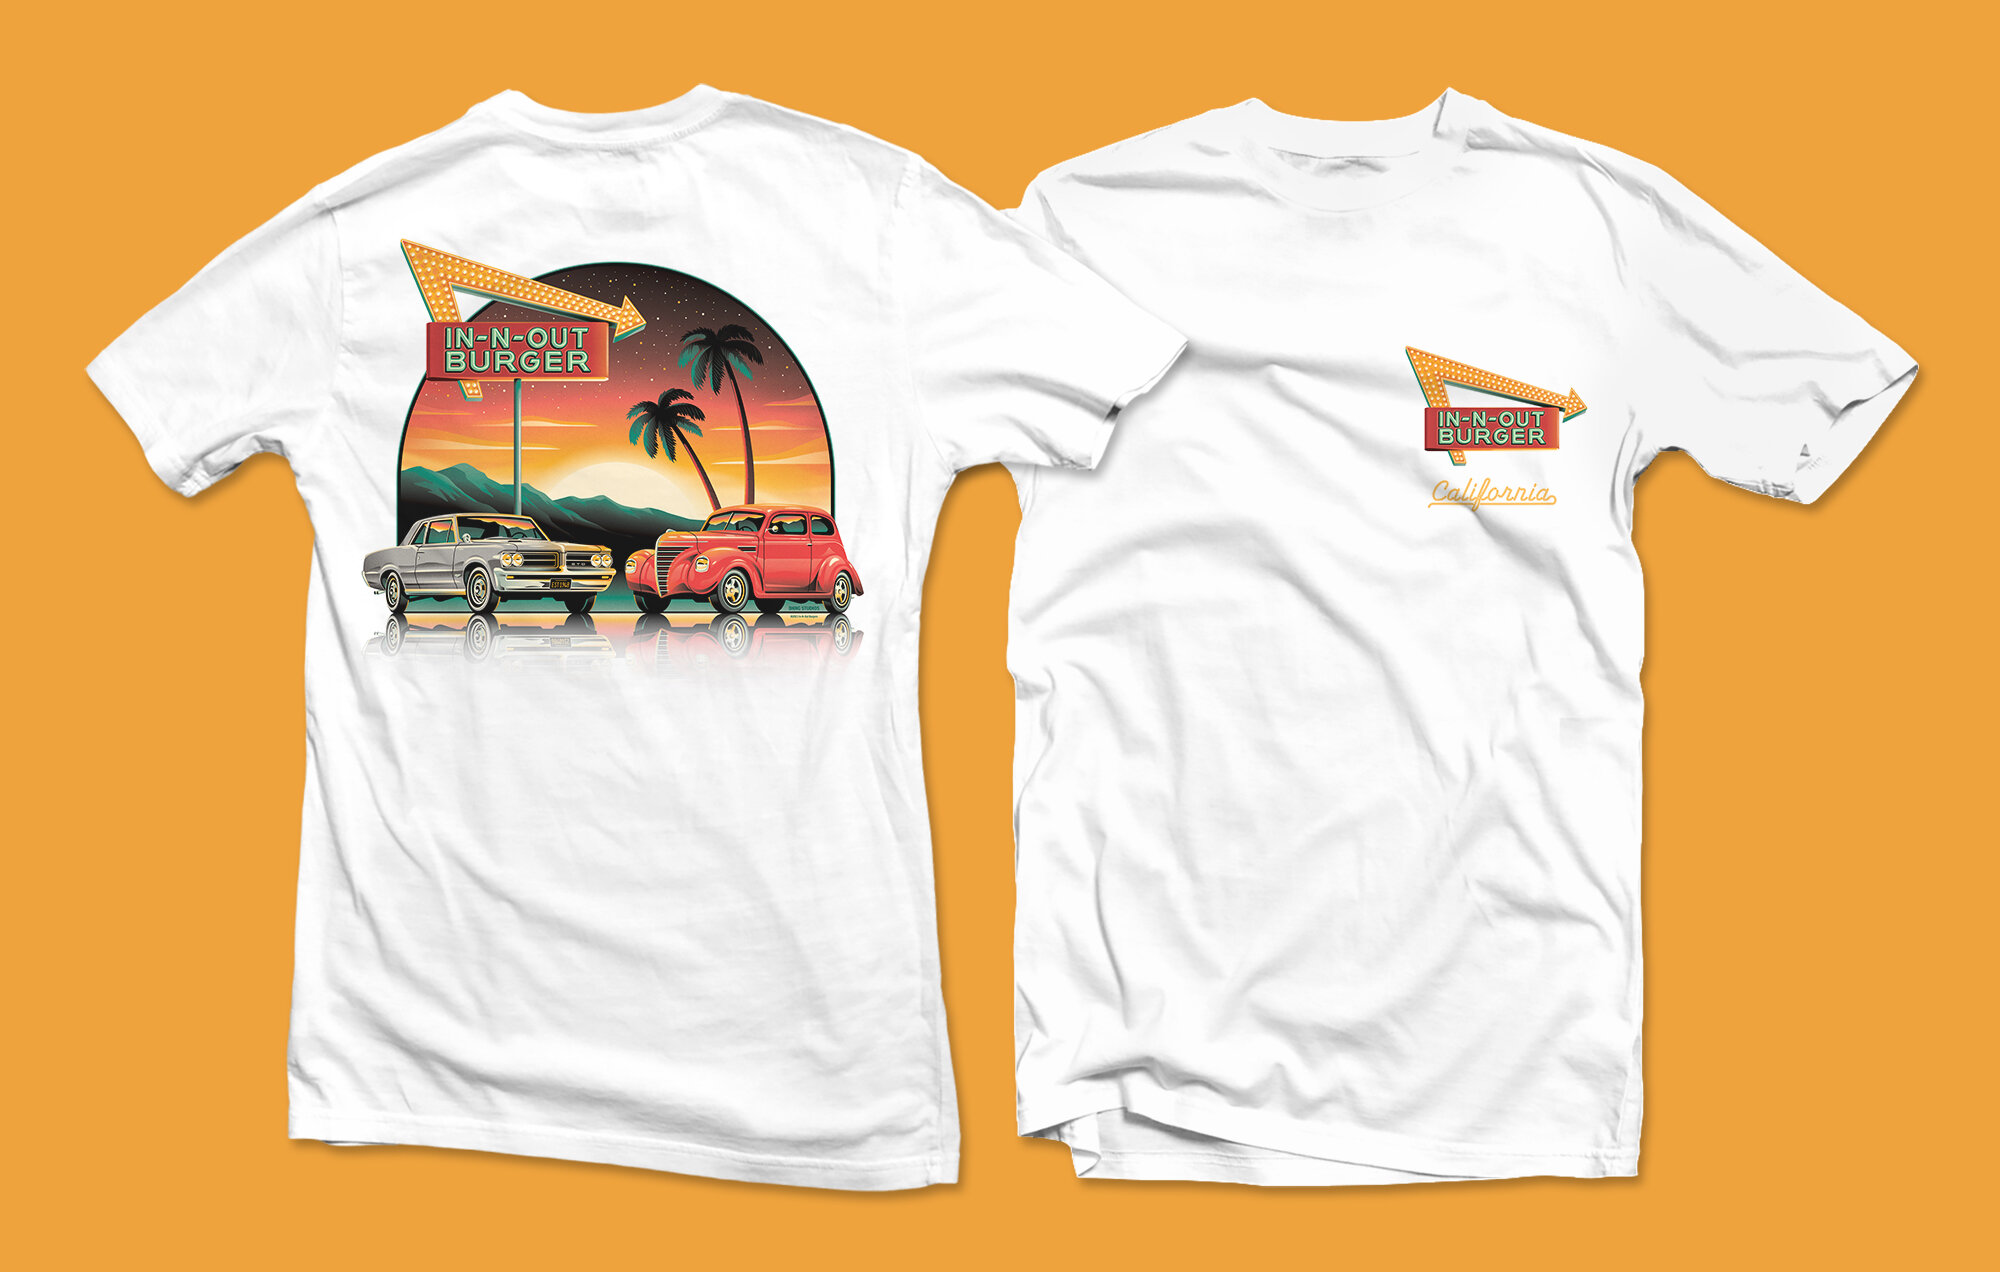 In-N-Out Burger 2021 Official Tee - Summer Edition! — DKNG